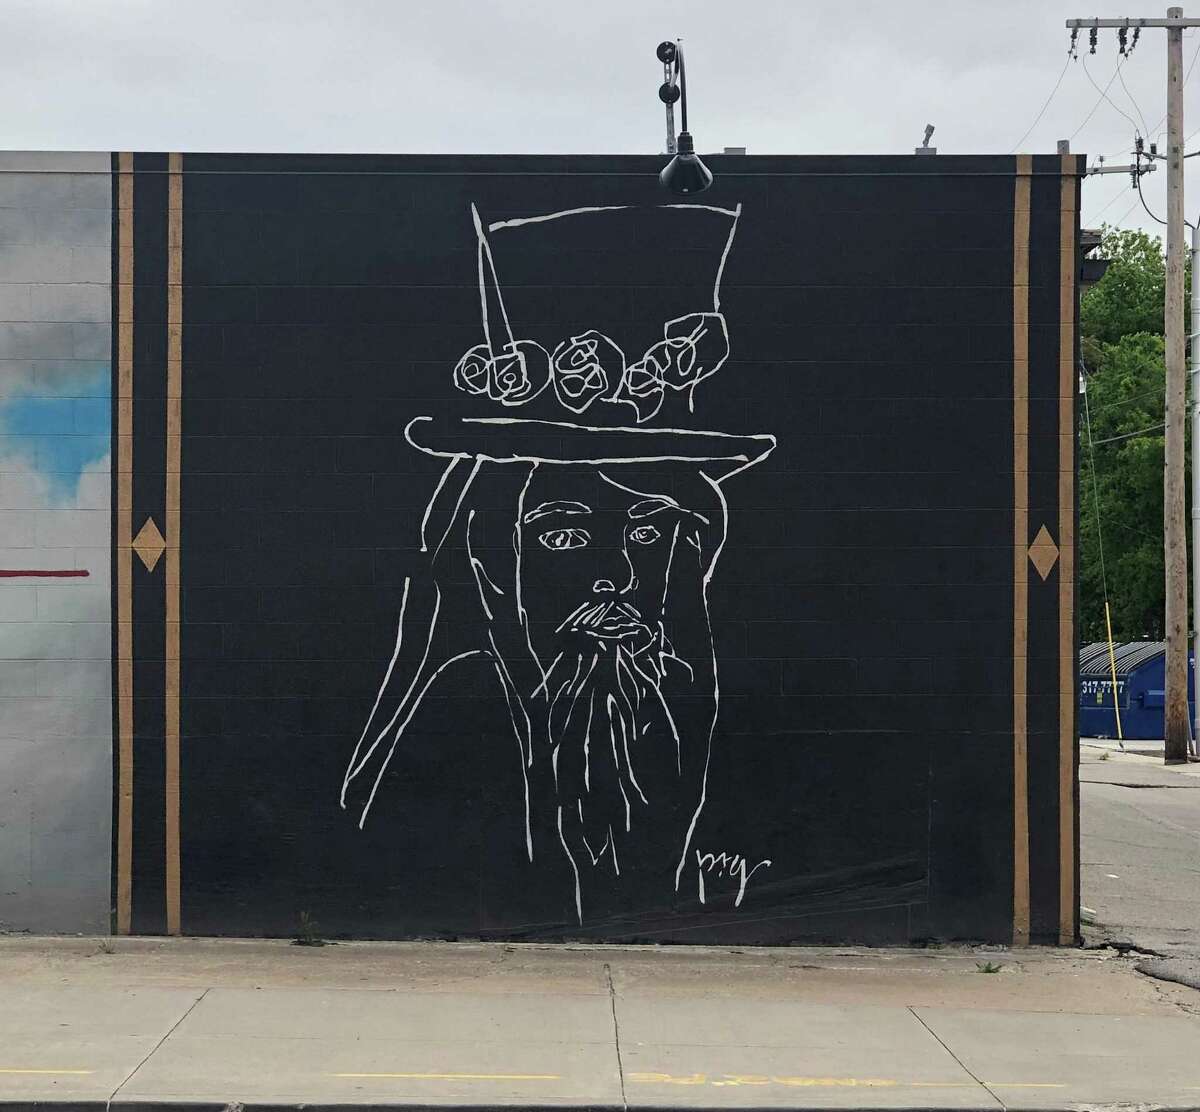 Leon Russell mural outside the Church Studio, which Russell opened in 1972. Today the studio is again an active space for musicians to record, while also a museum dedicated to Russell.